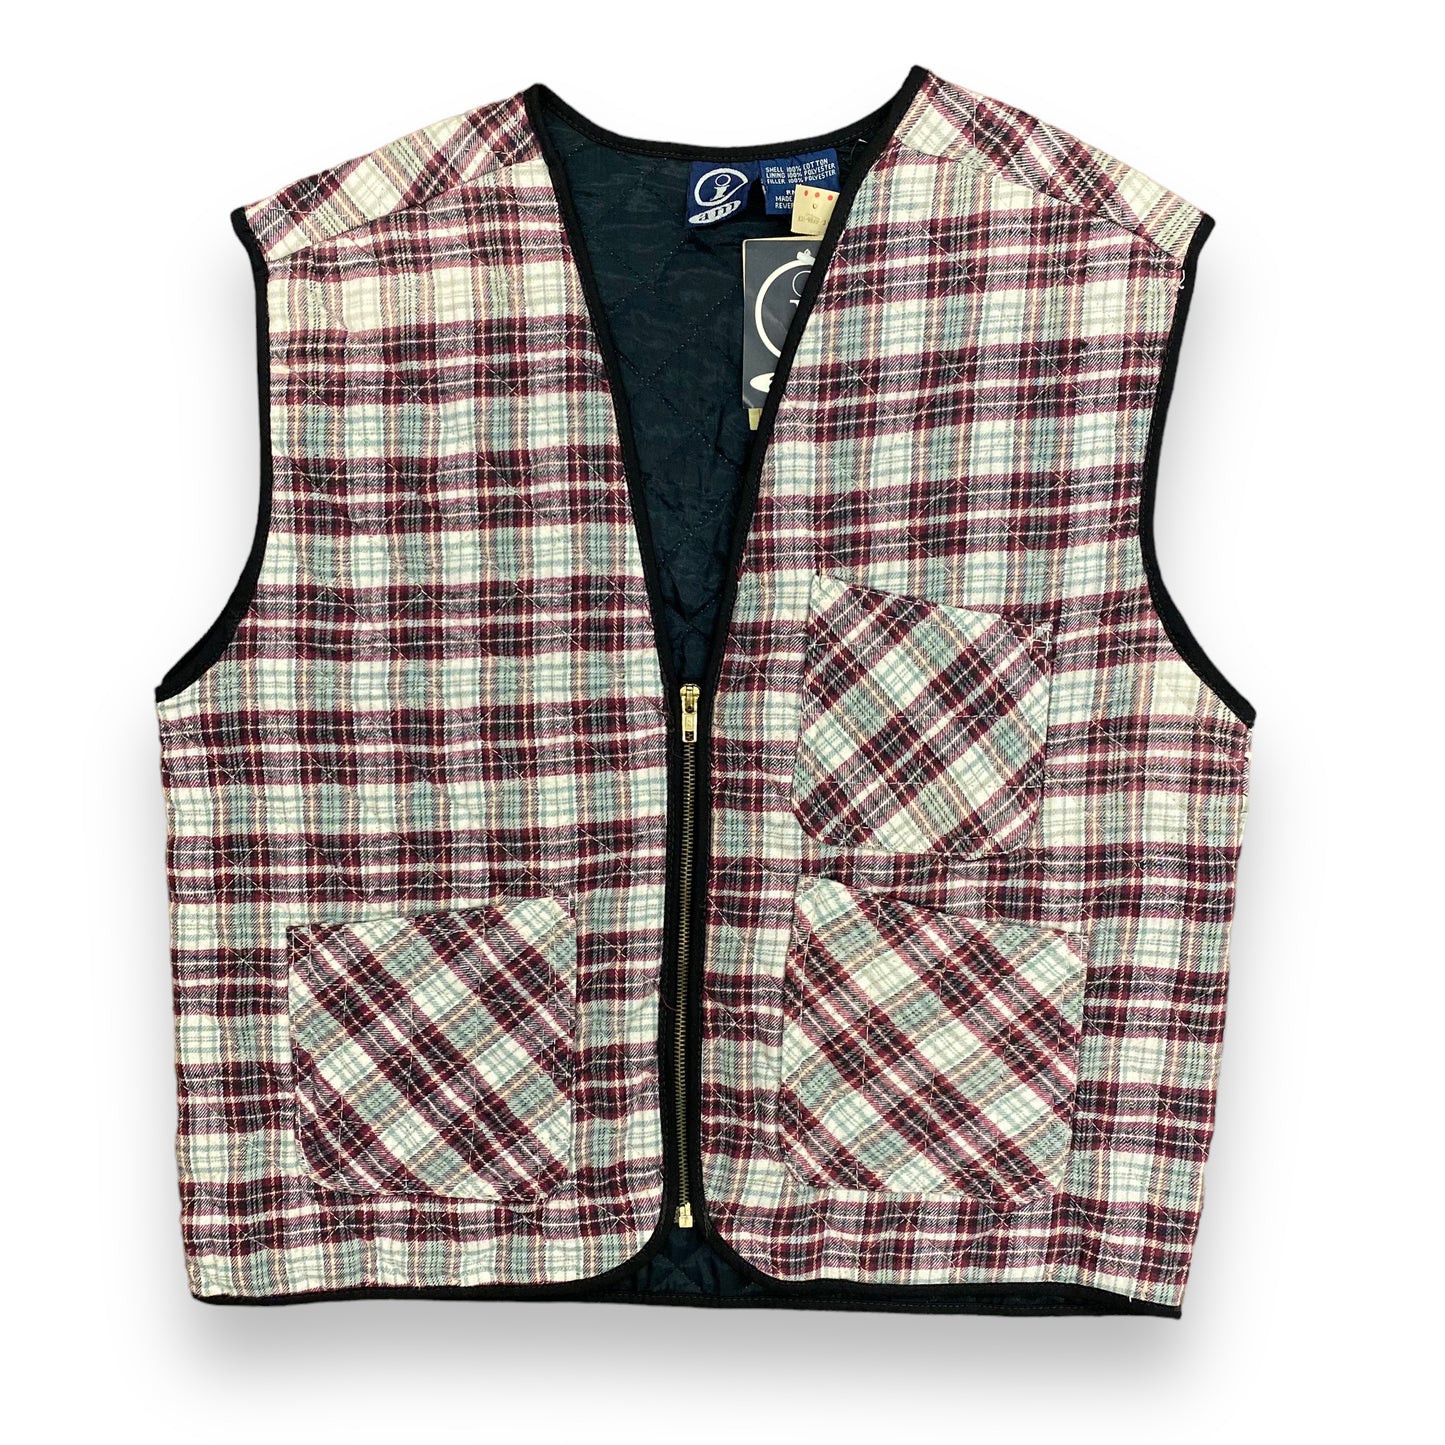 NWT Vintage 1990s Quilted Plaid Vest - Size Large